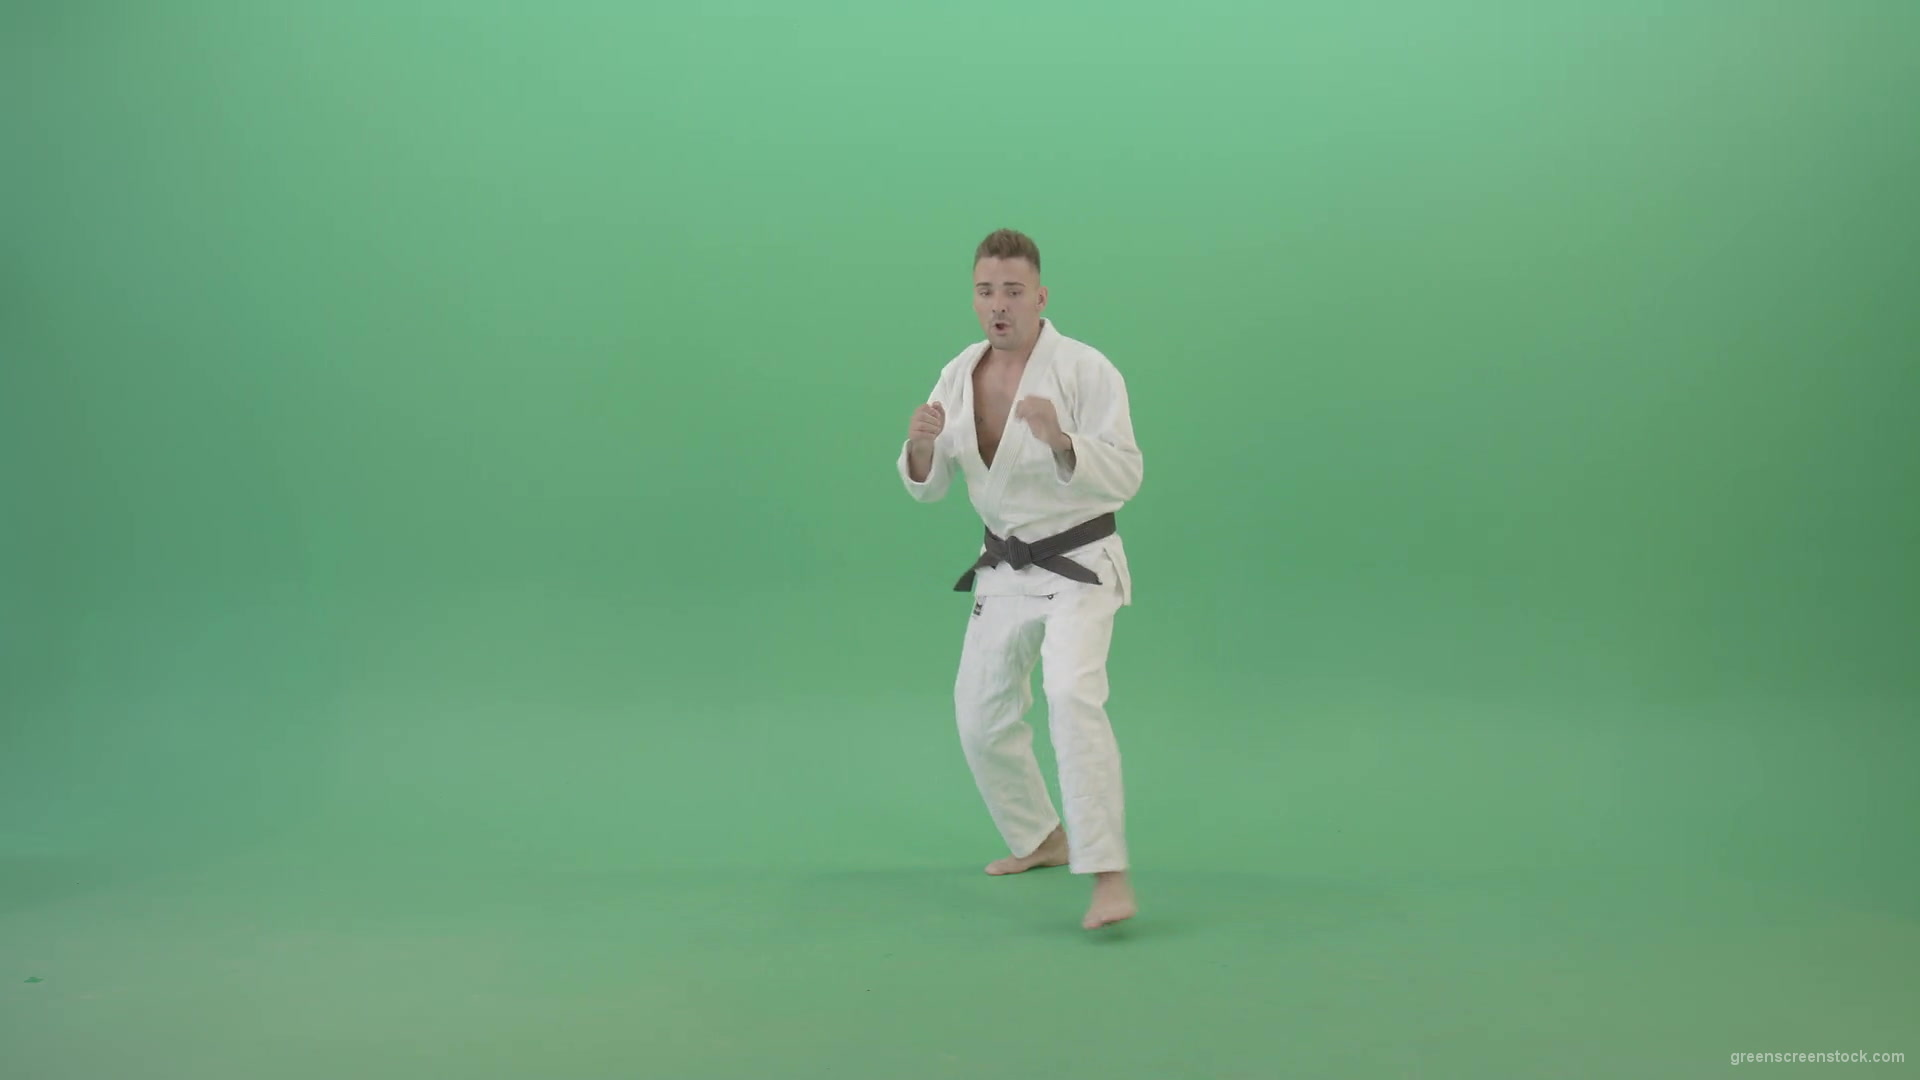 Karate-man-fight-front-vie-kick-punch-isolated-on-green-screen-4K-Video-Footage-1920_002 Green Screen Stock